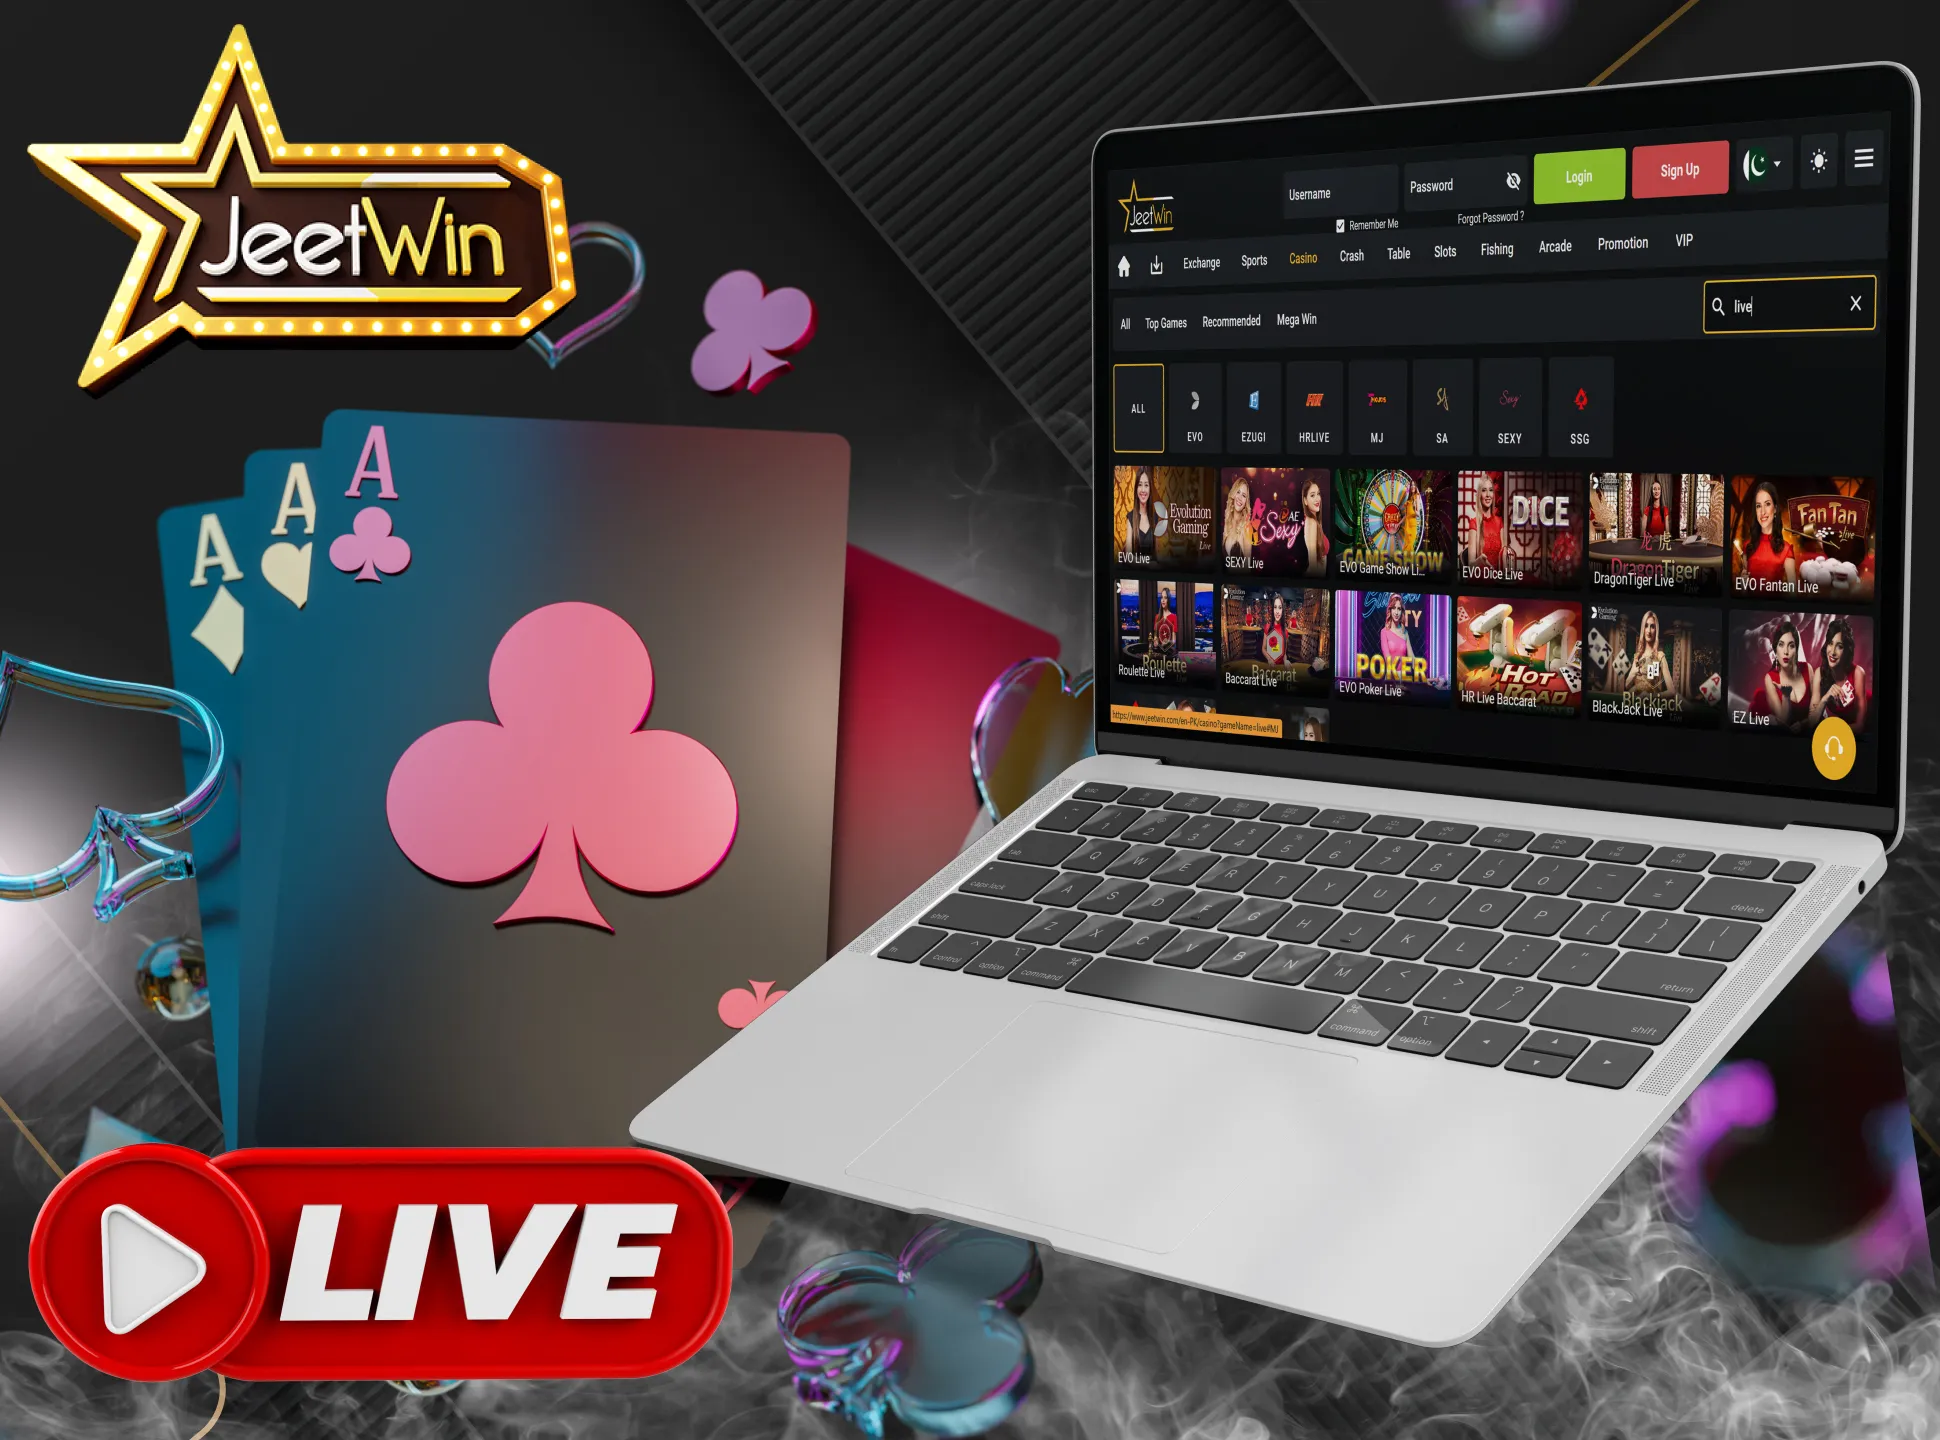 Find out more about the Live Casino section of the JeetWin online casino site.